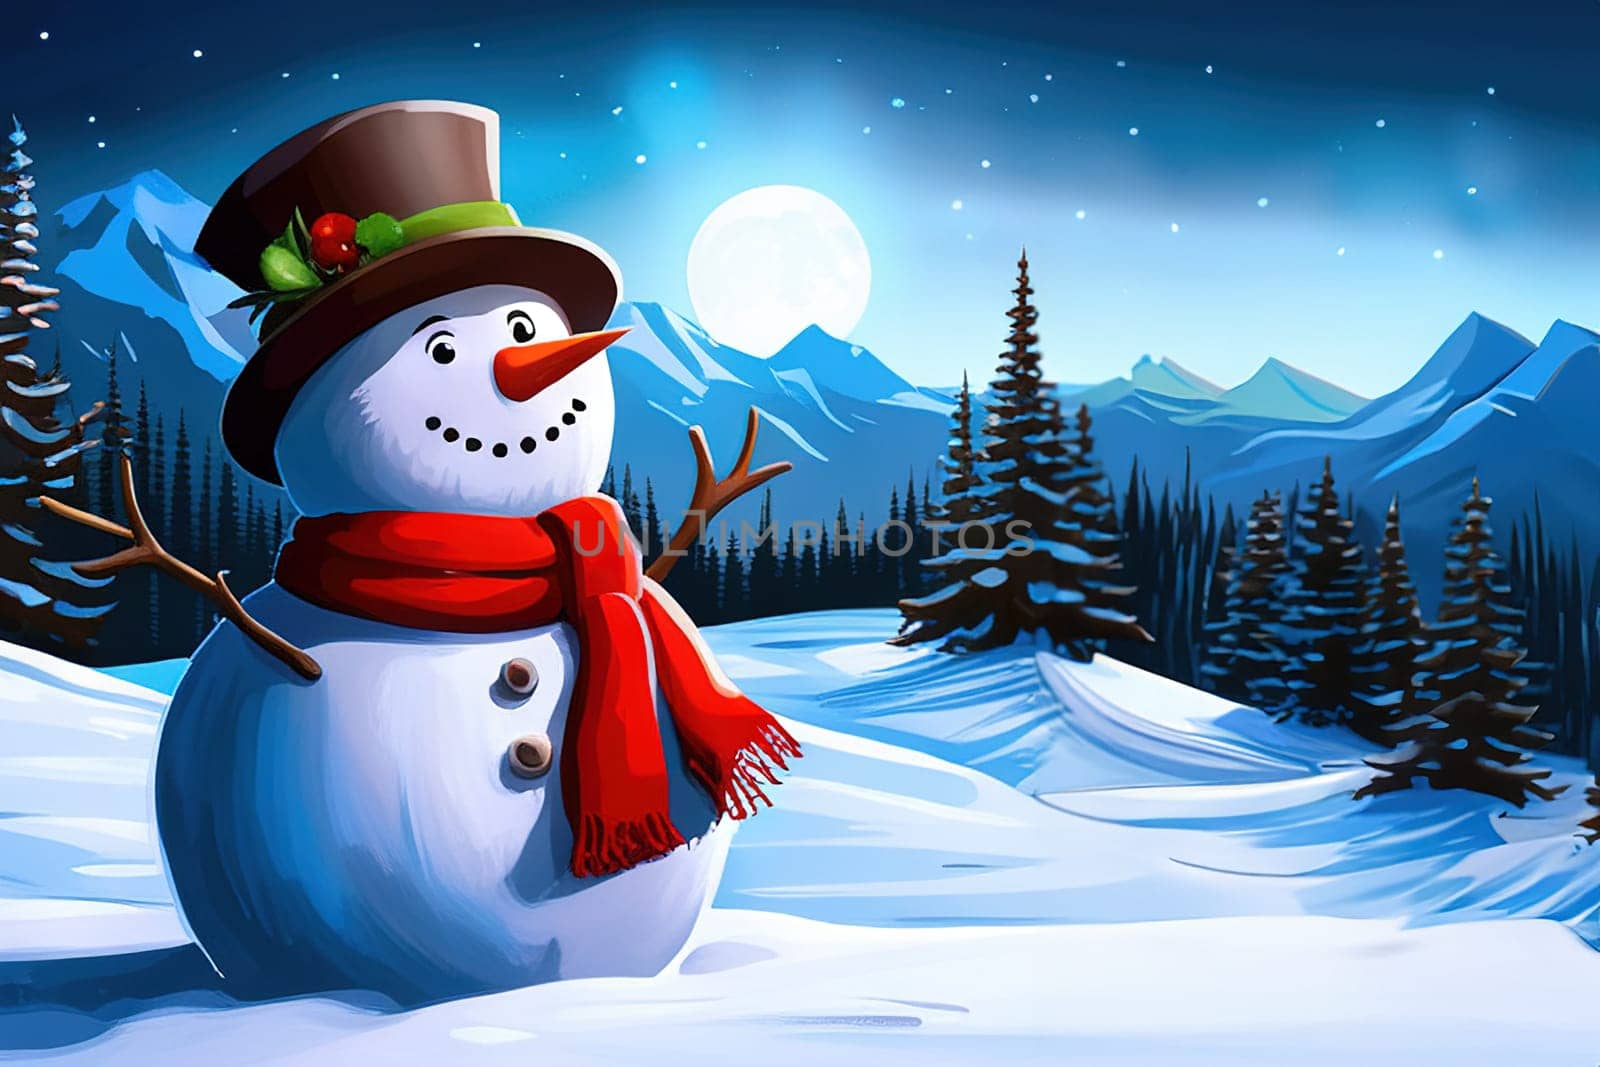 Smiling snowman on winter snowy background, perfect for holiday designs. by EkaterinaPereslavtseva